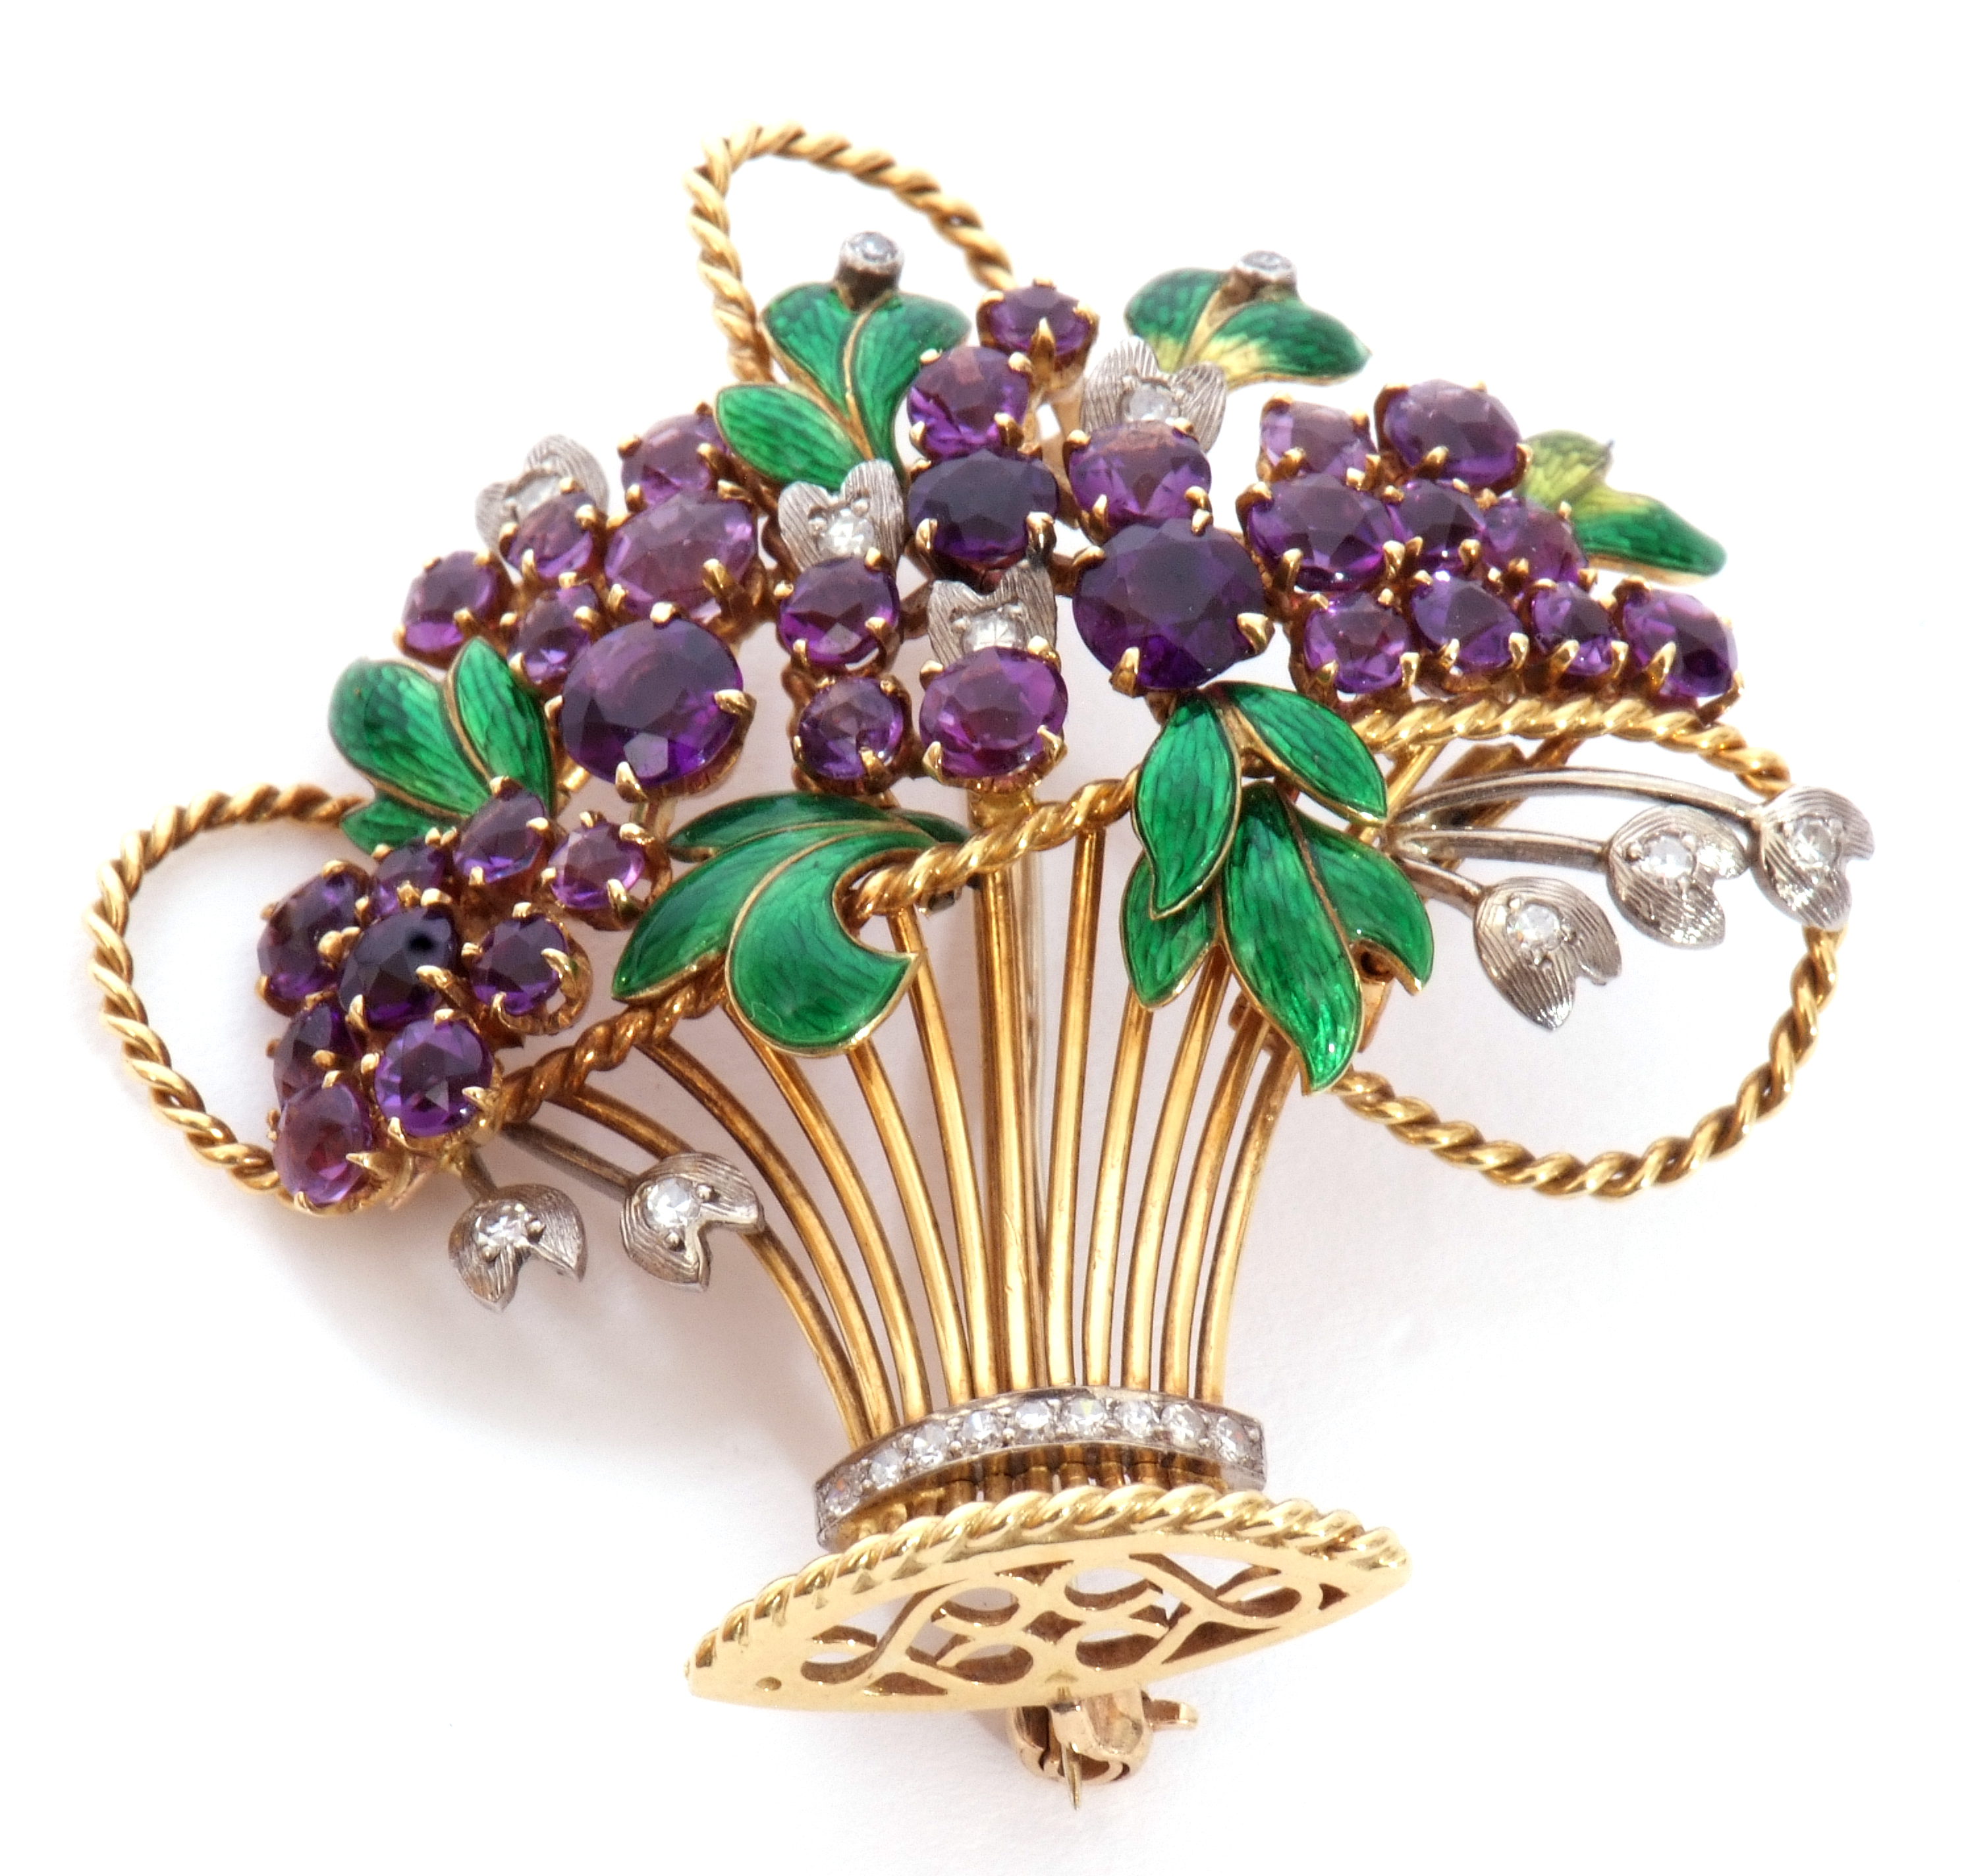 Enamel and amethyst jardiniere brooch circa 1965, the open work basket with wire work detailing,